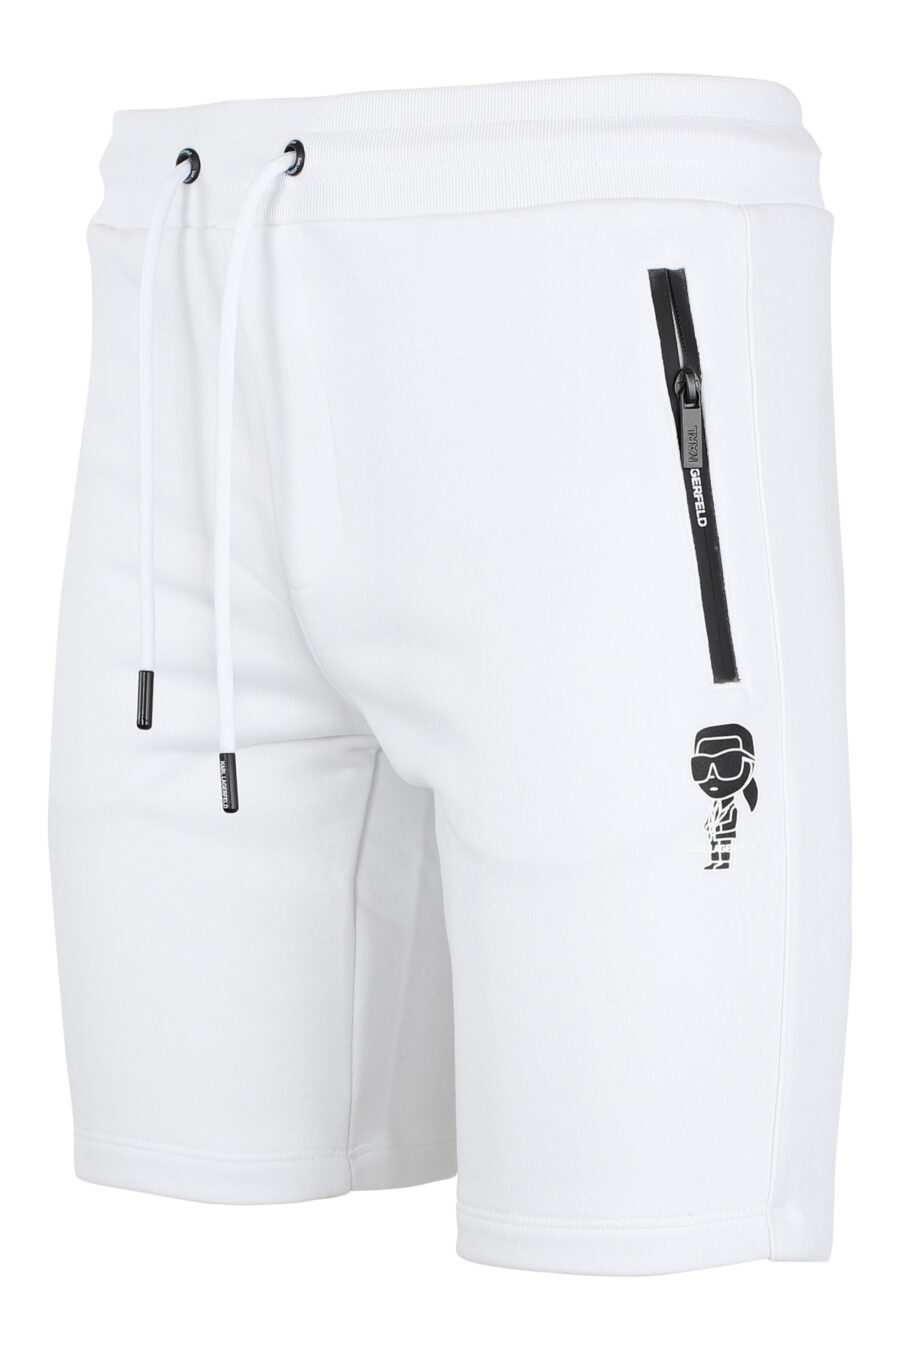 Tracksuit bottoms white short with "karl" minilogue in black silhouette - IMG 9515